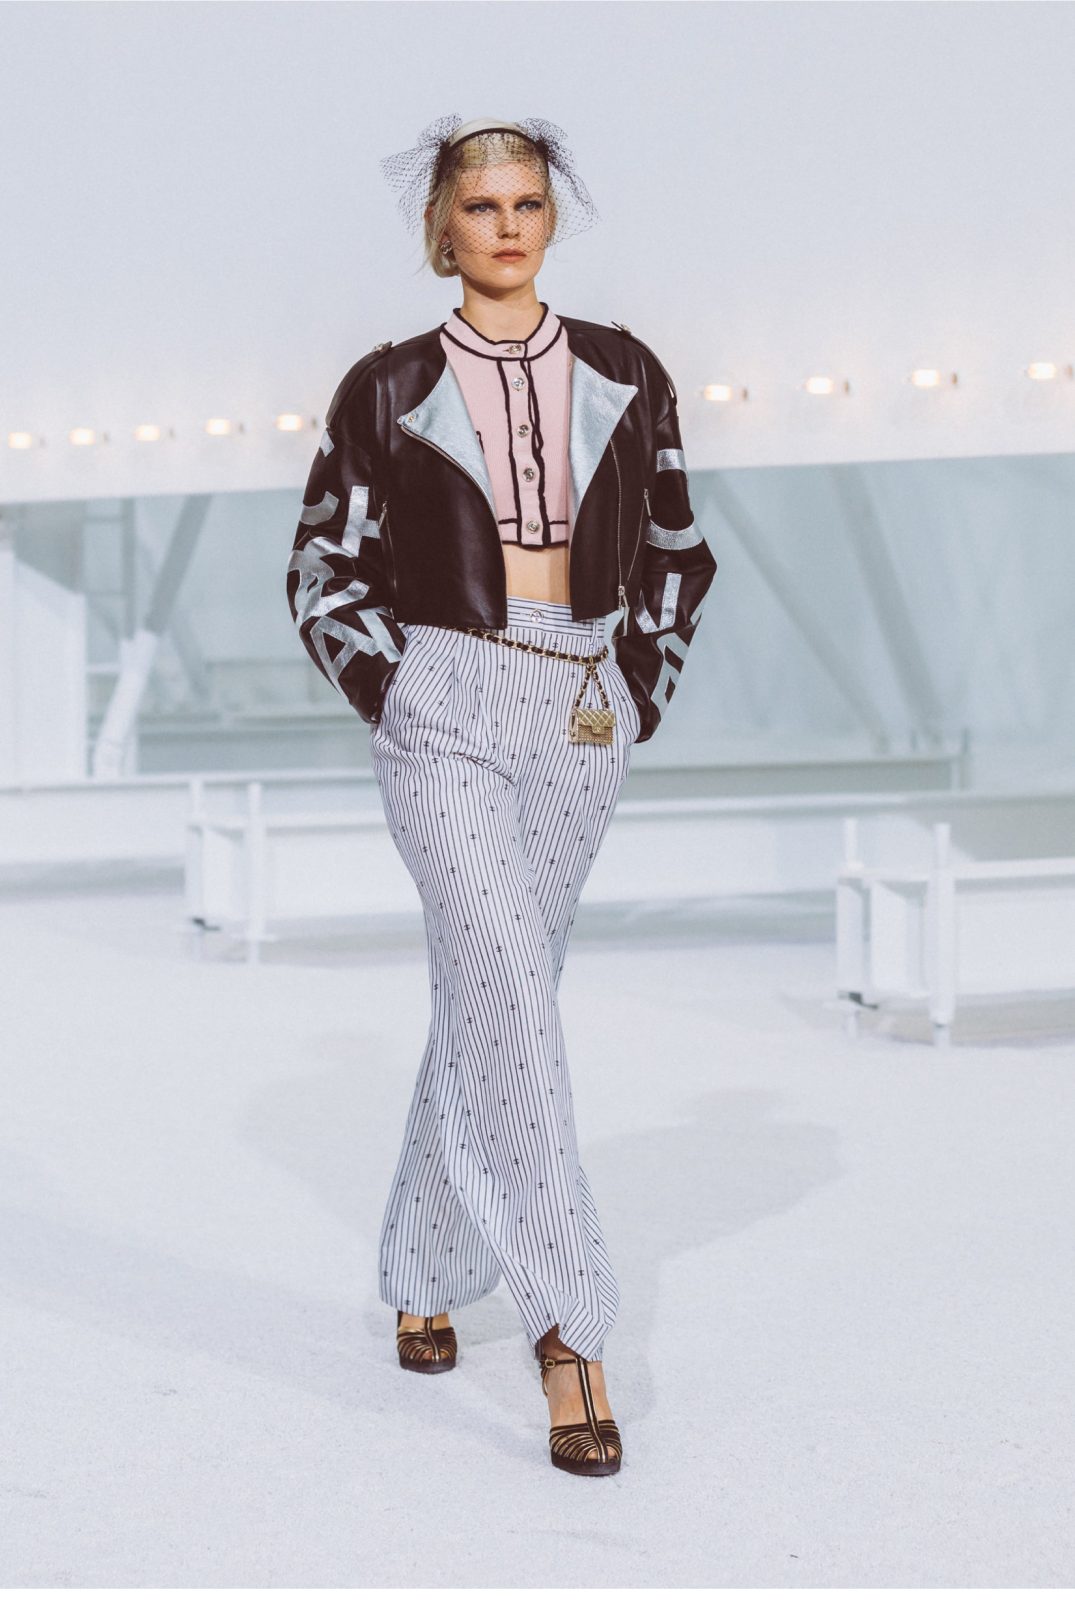 Chanel's Vision of Hollywood for Spring 2021 Is Devoid of Any